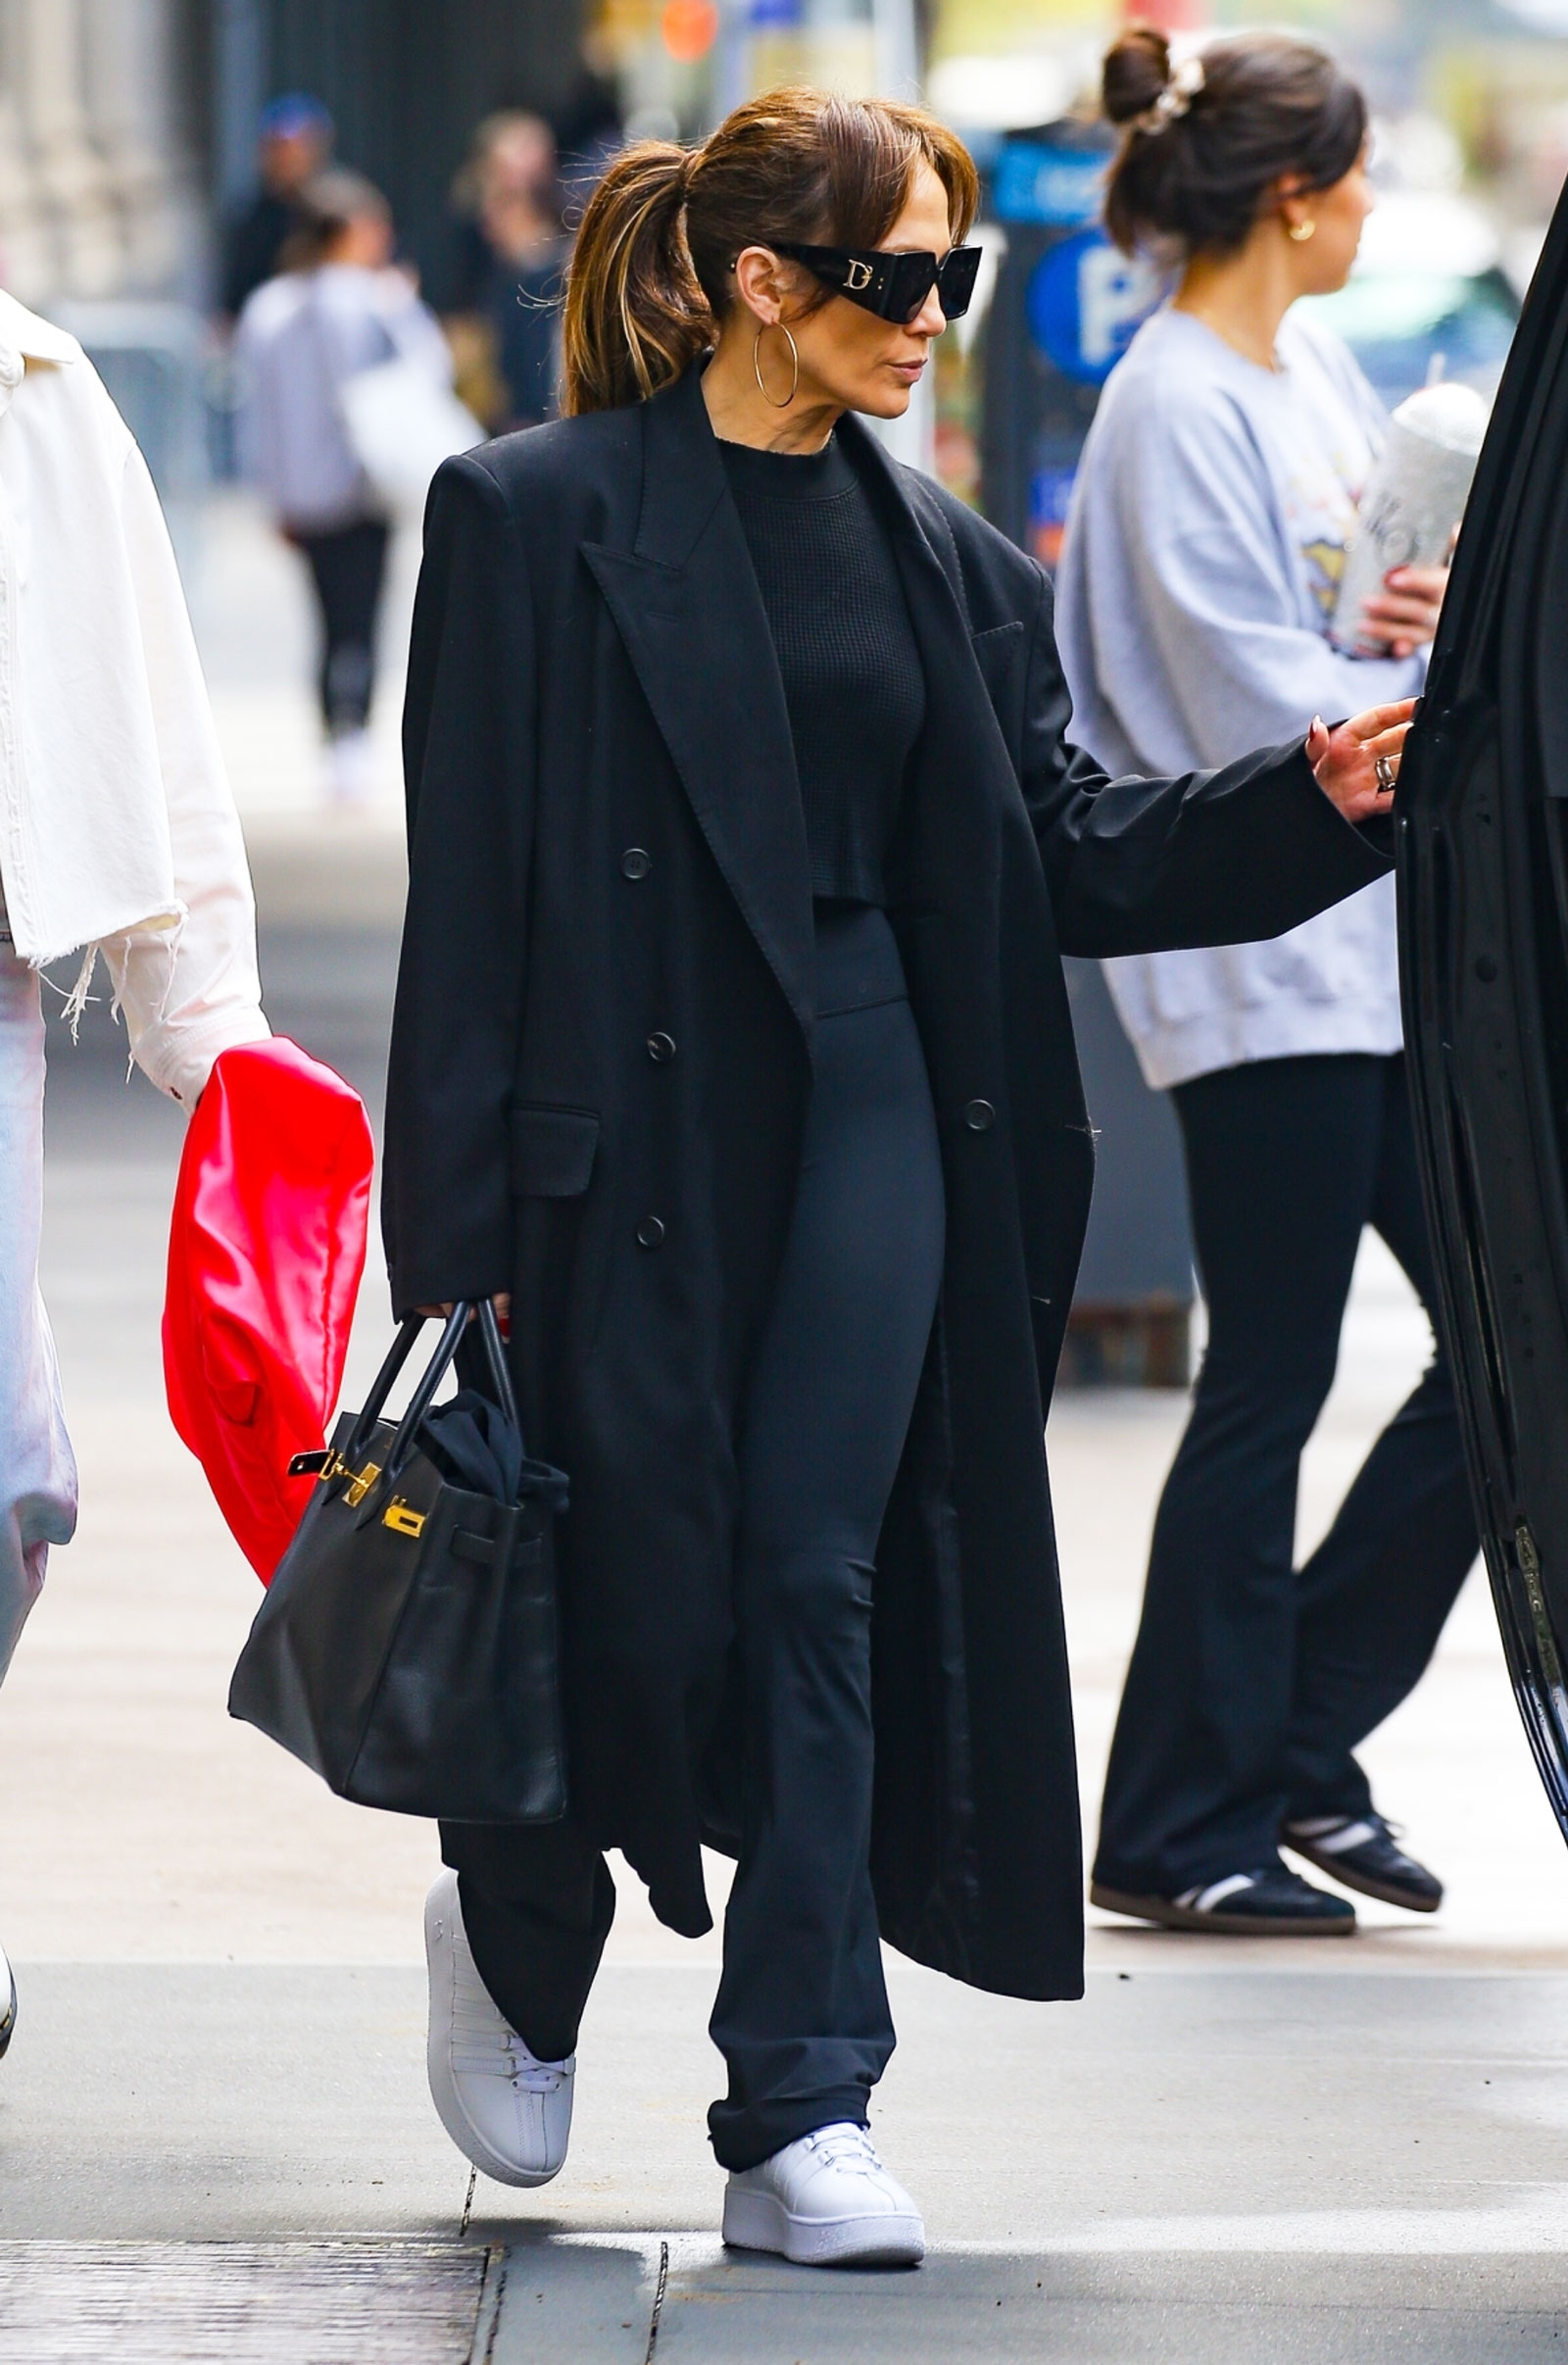 Jennifer Lopez wearing white platform sneakers with leggings and an all-black outfit